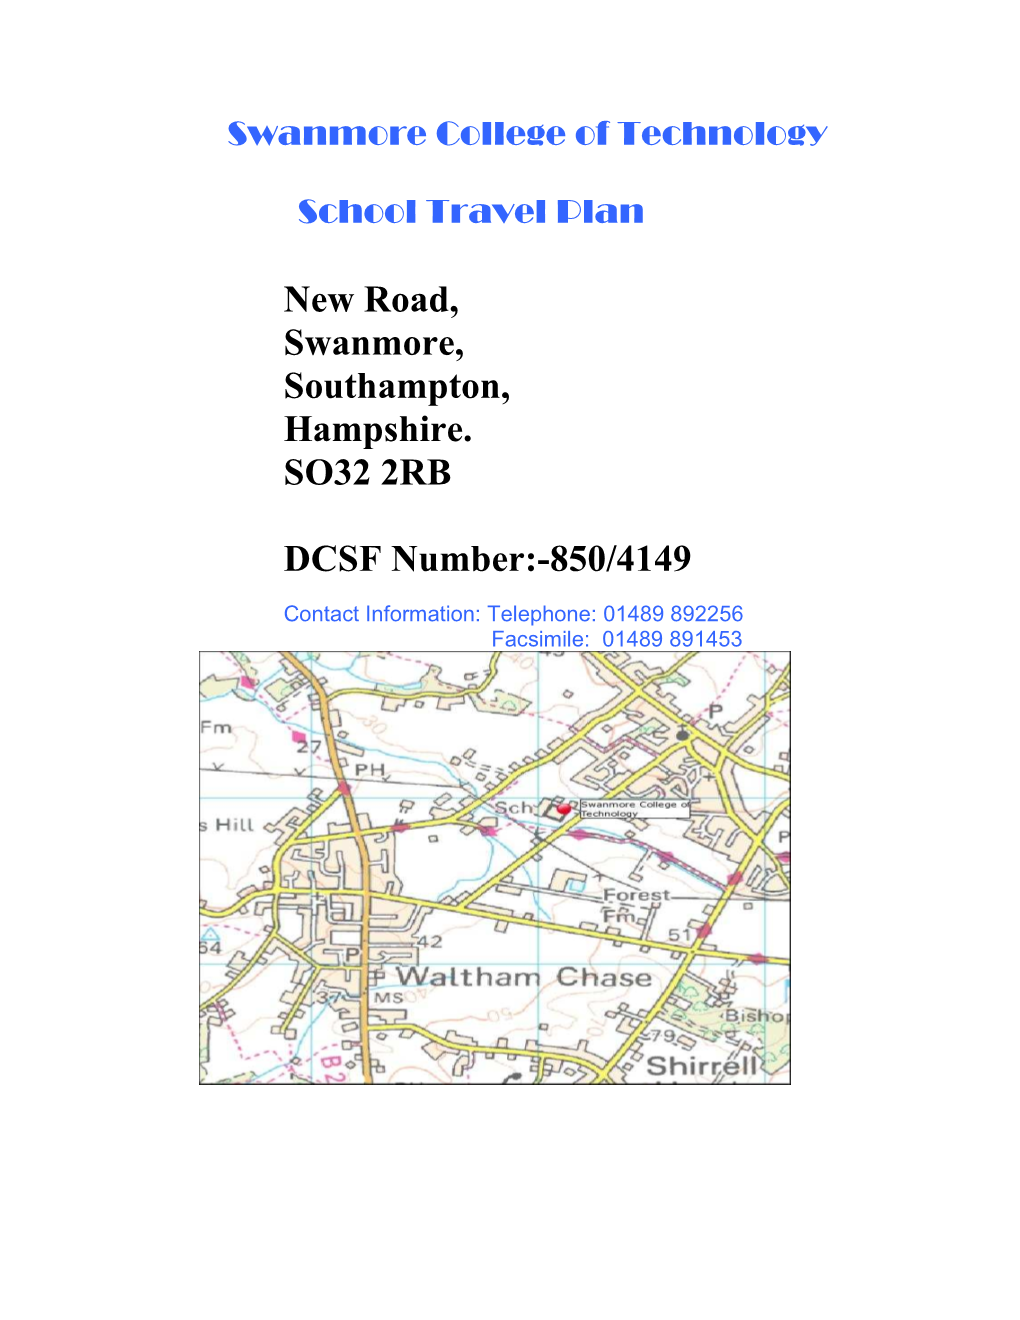 Swanmore College of Technology Travel Plan Dec 2009